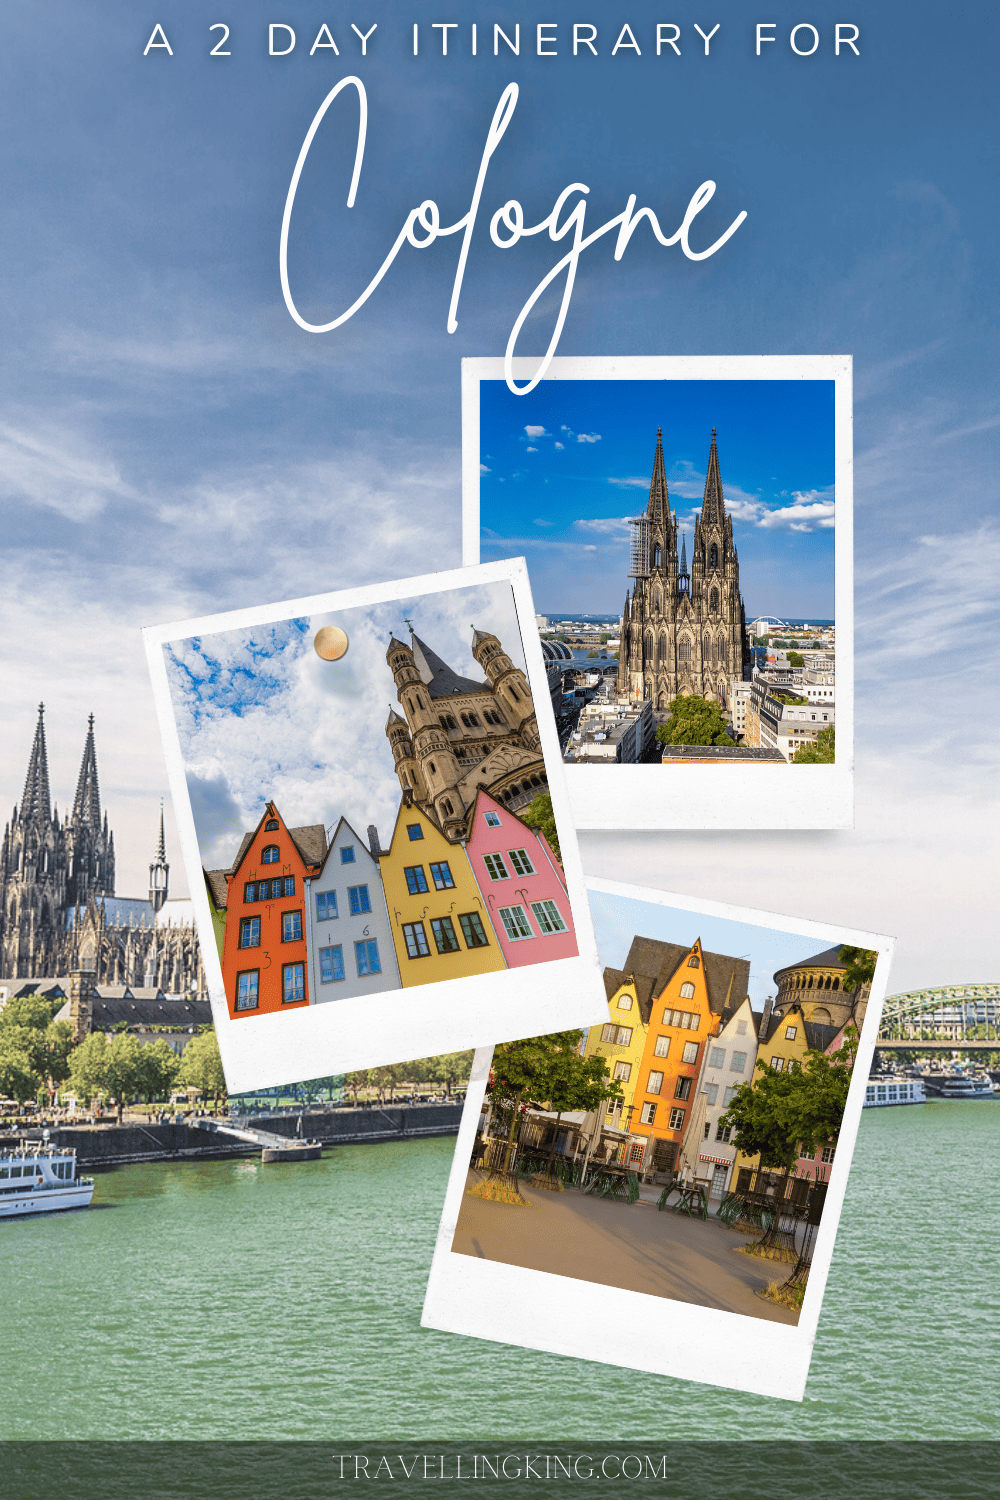 48 hours in Cologne - A 2 day Itinerary